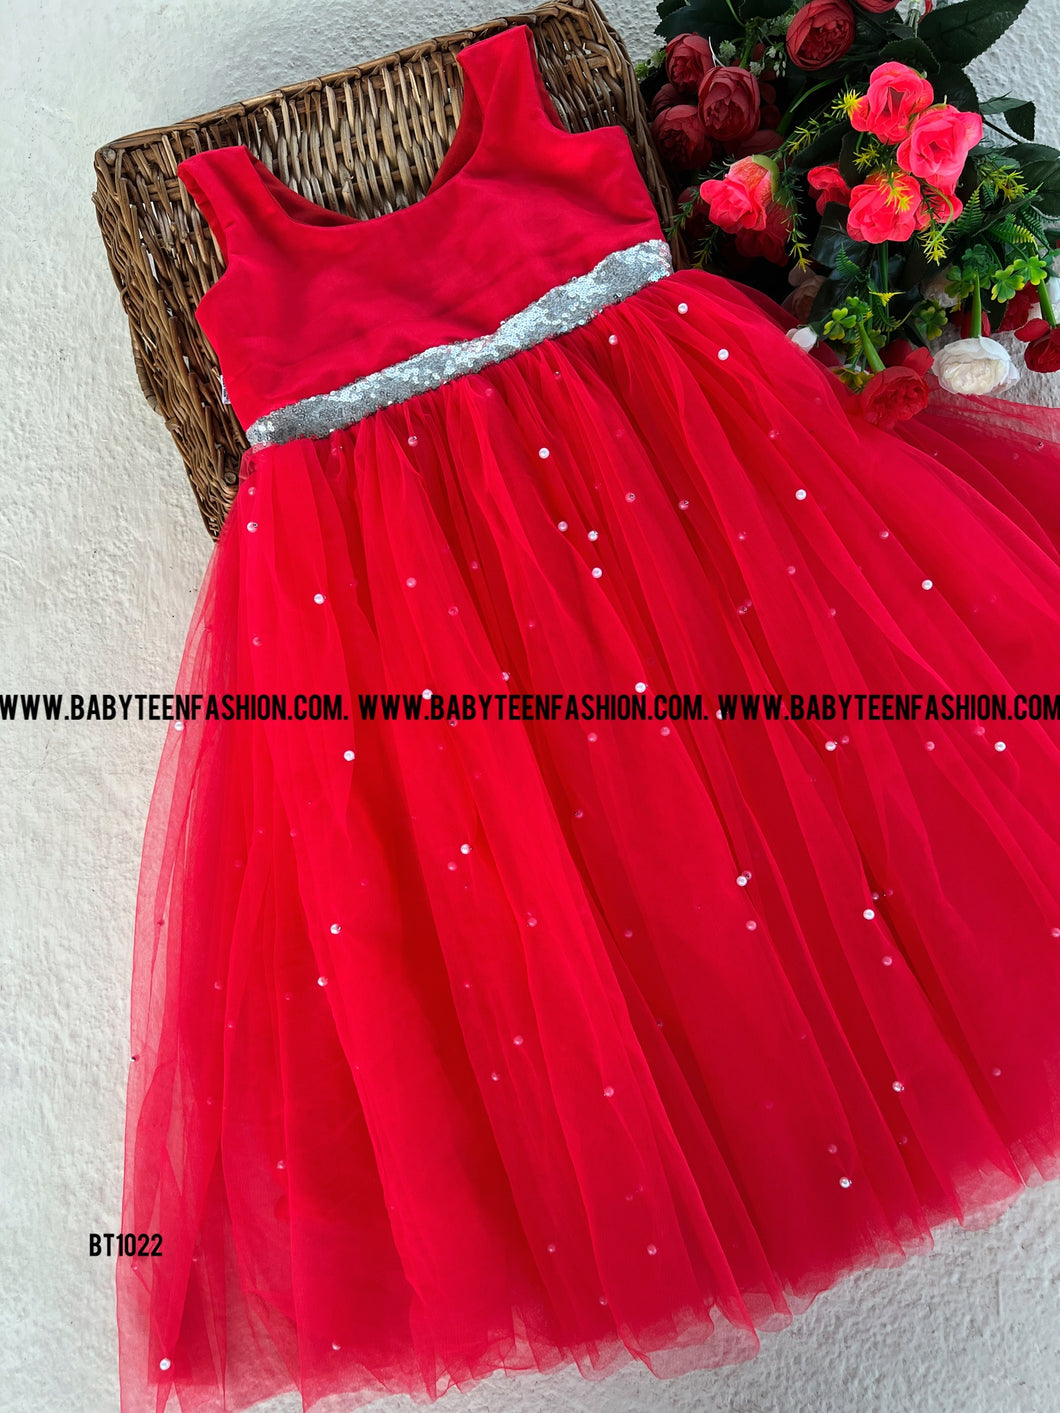 BT1022 Ruby Sparkle Dress - Twinkle at Every Turn